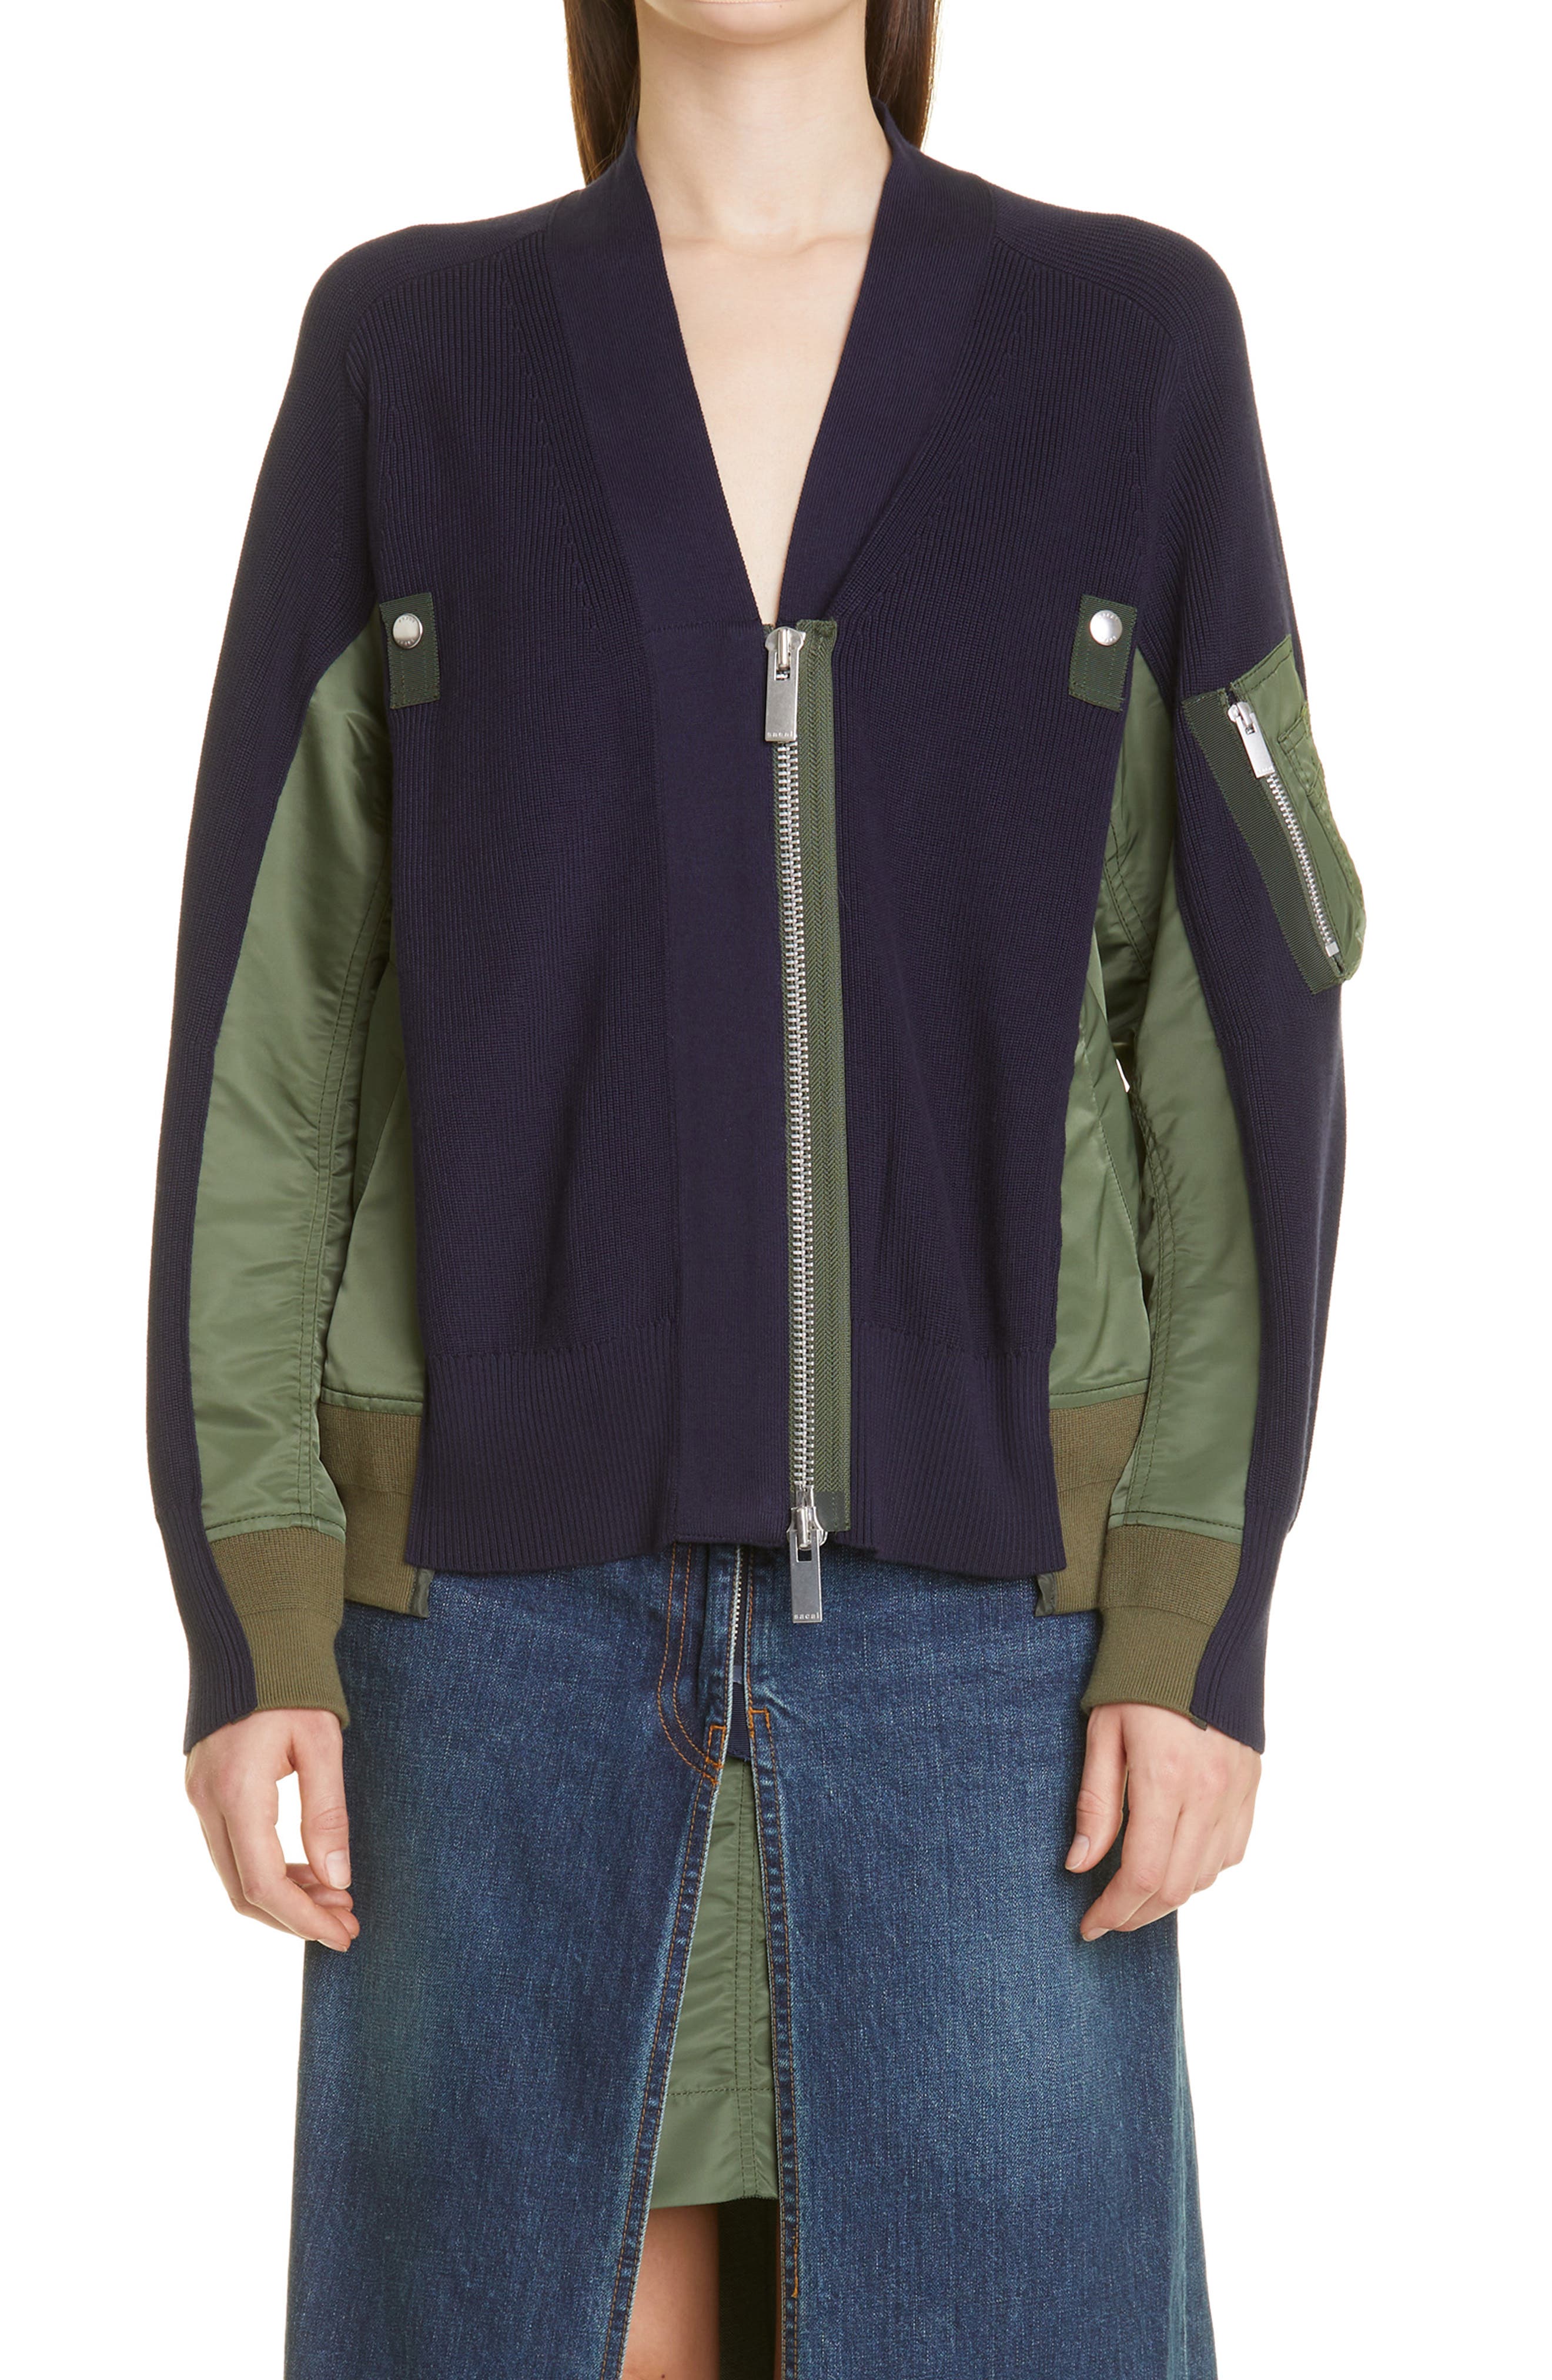 Sacai Hybrid Cotton & Nylon MA-1 Sweater Jacket in Navy at Nordstrom, Size 2